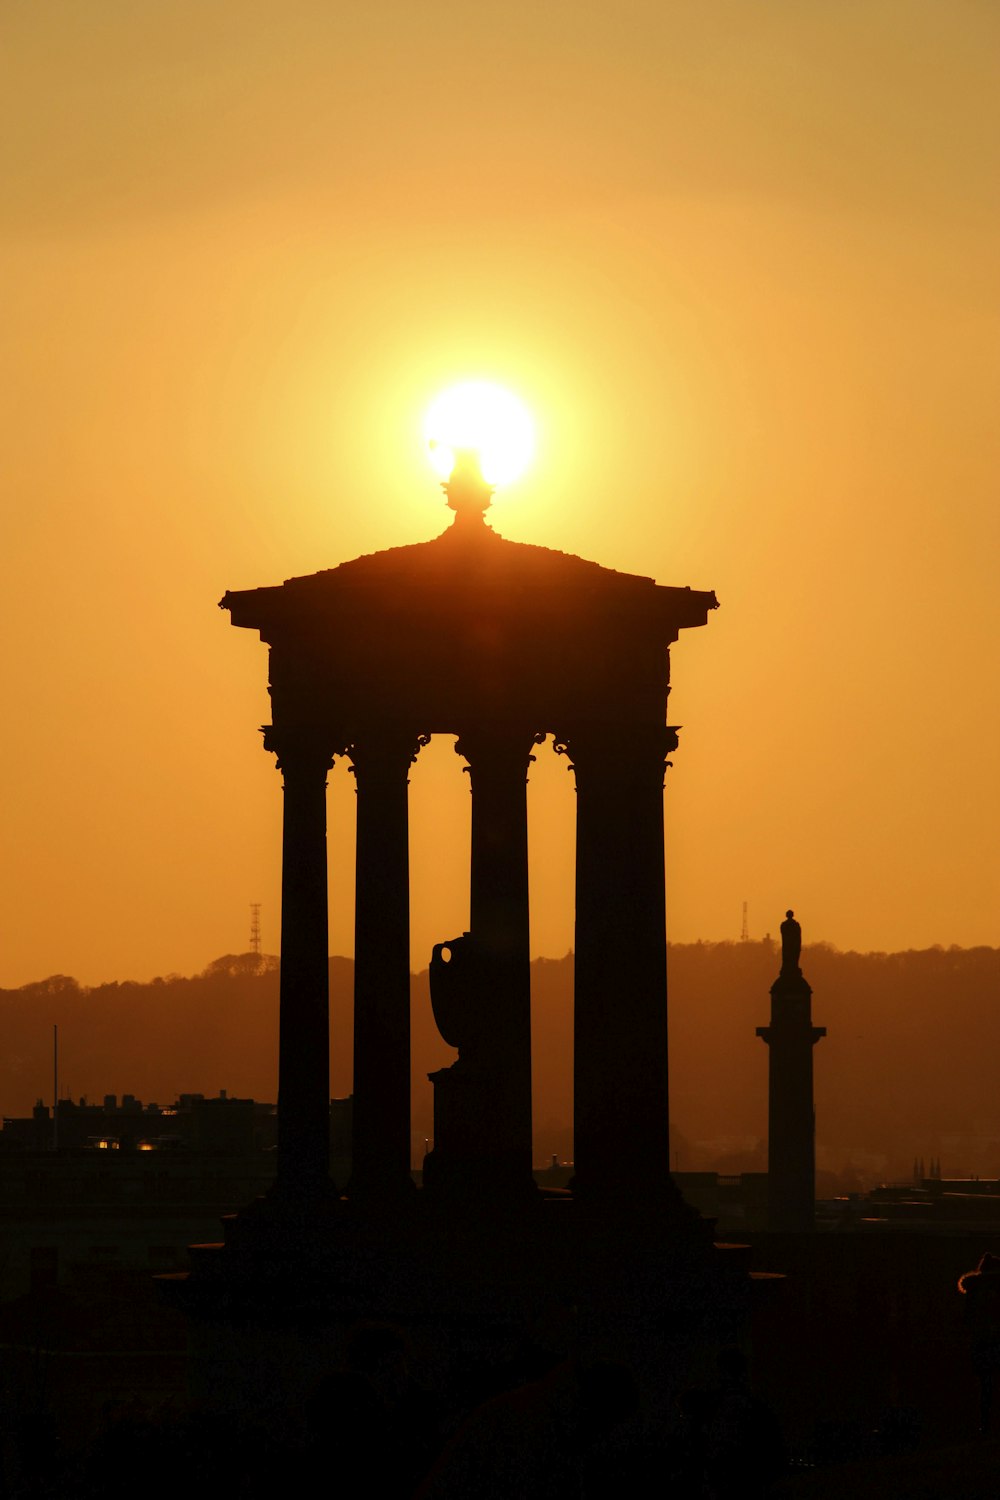 the sun is setting behind a building with pillars